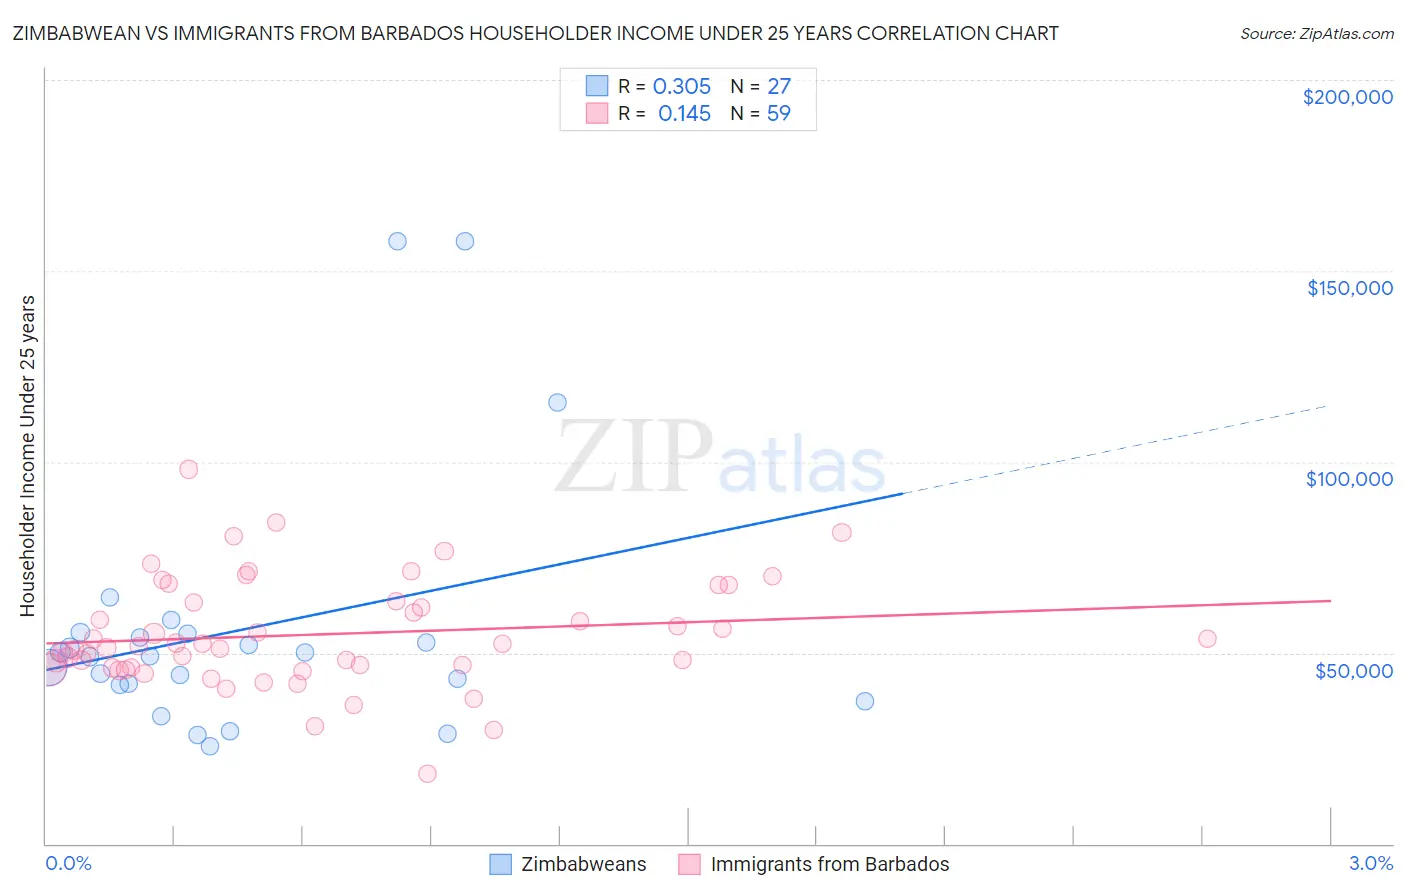 Zimbabwean vs Immigrants from Barbados Householder Income Under 25 years